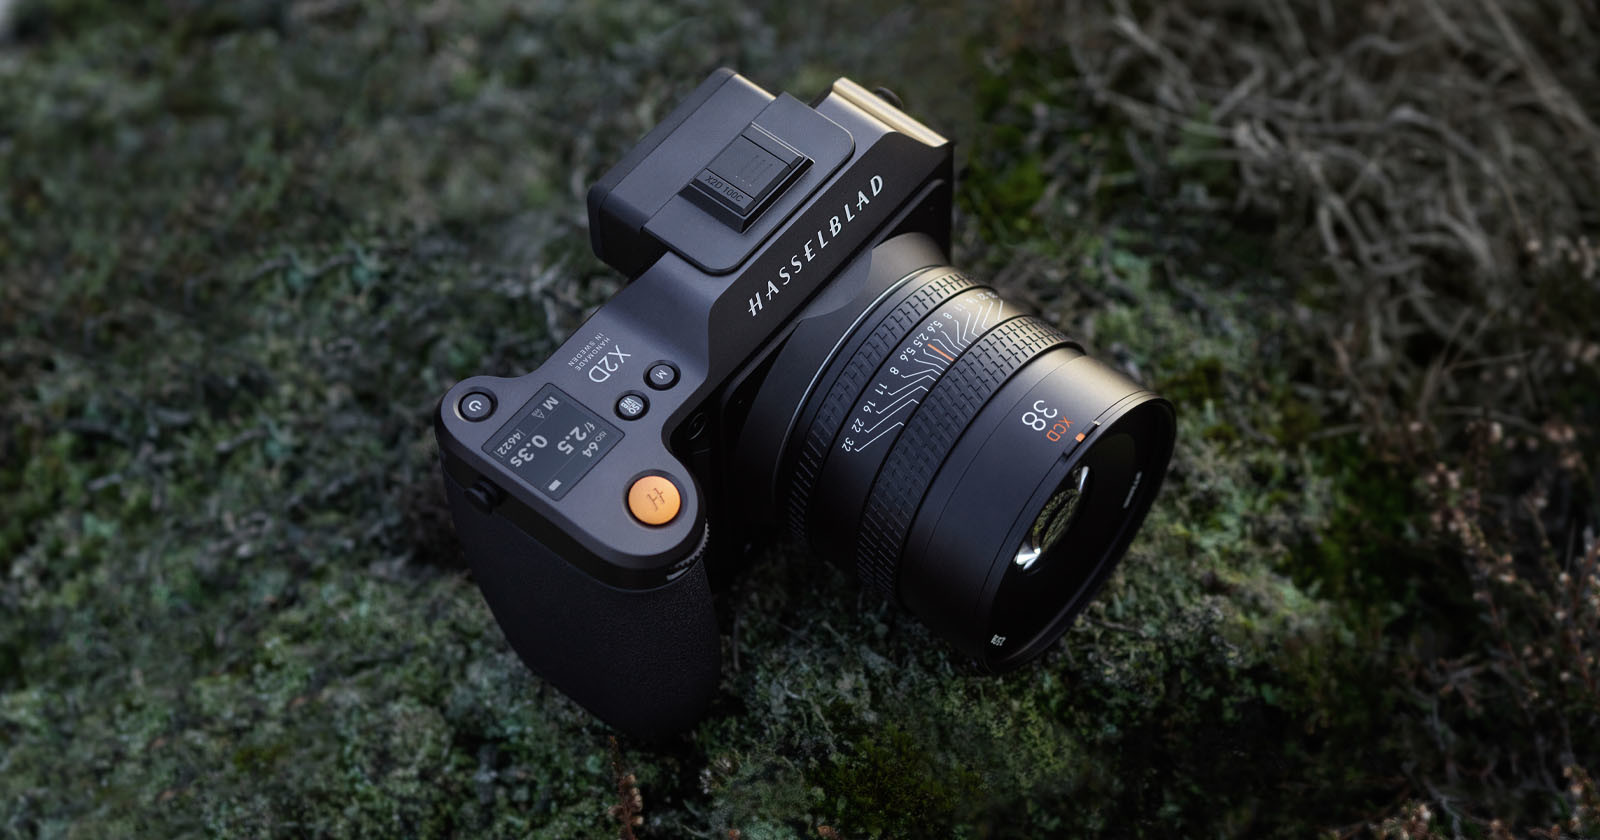 Hasselblad X2D 100C: A 100MP Camera with IBIS and Hybrid AF